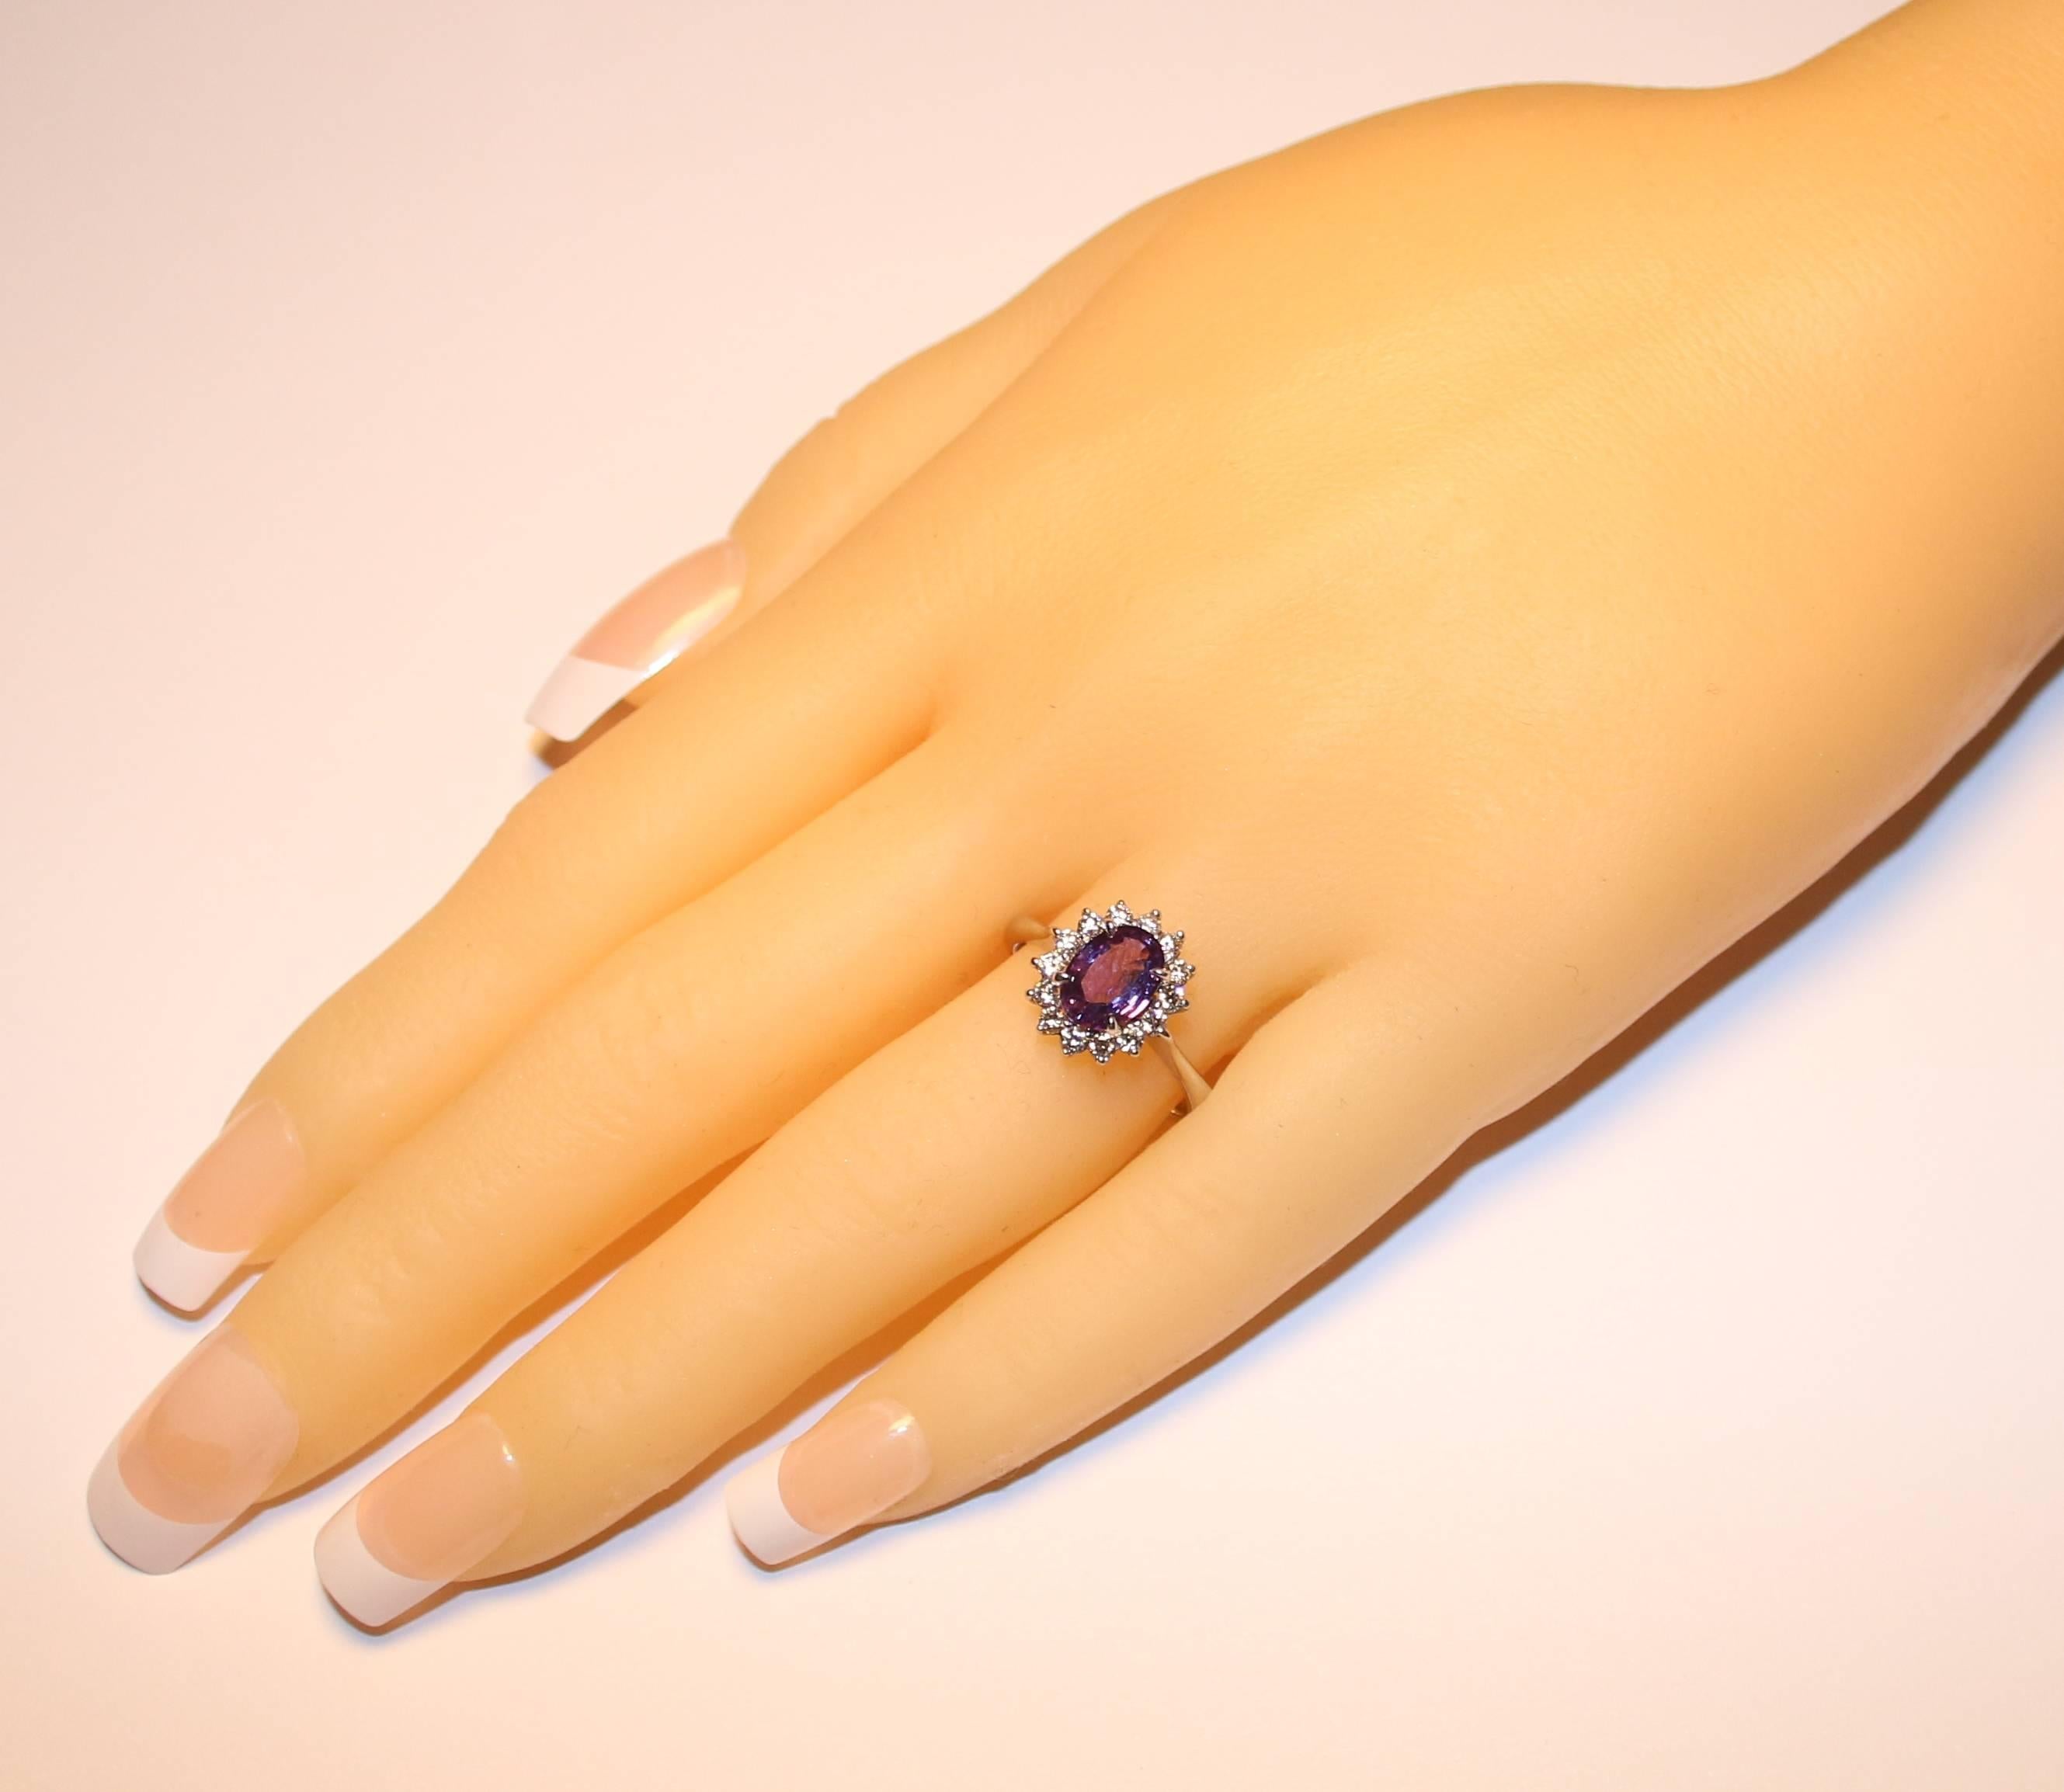 Contemporary Certified No Heat 1.32 Carats Oval Violet Sapphire Diamond Ring